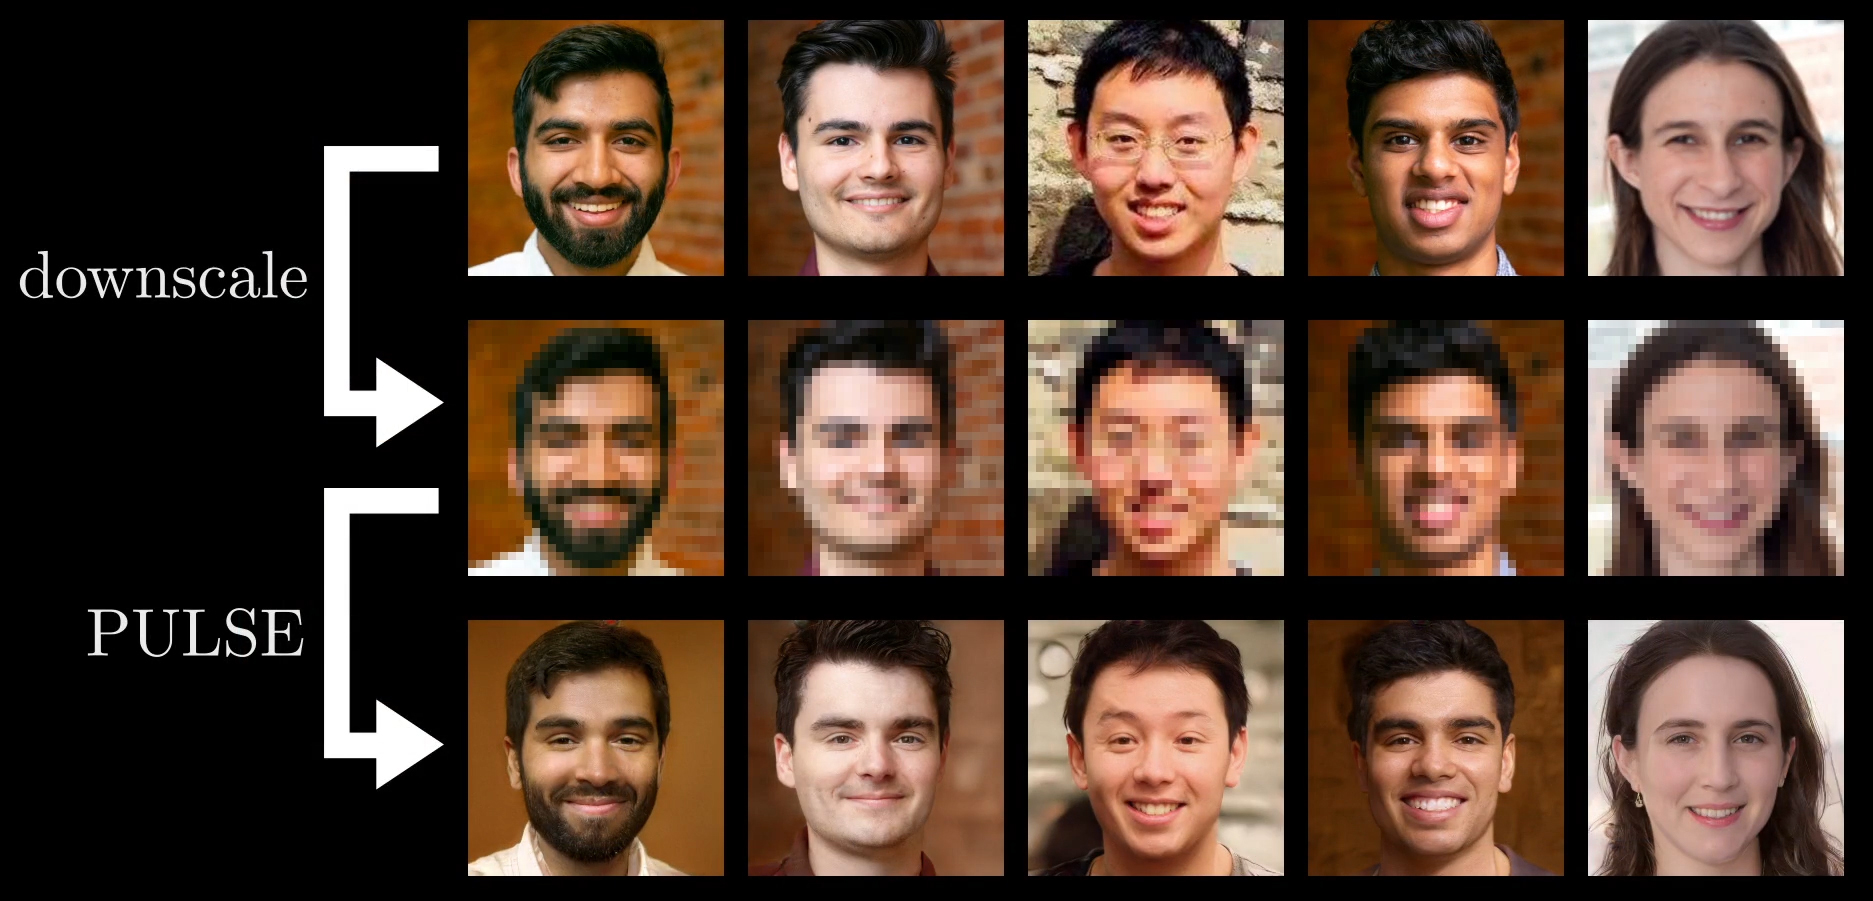 The Pulse research team from Duke University demonstrating the results (the lower row of headshots) of Pulse processing a low-res image (the middle row of headshots) compared to the original (the top row of headshots) high-res photos. (Photo: Duke University)